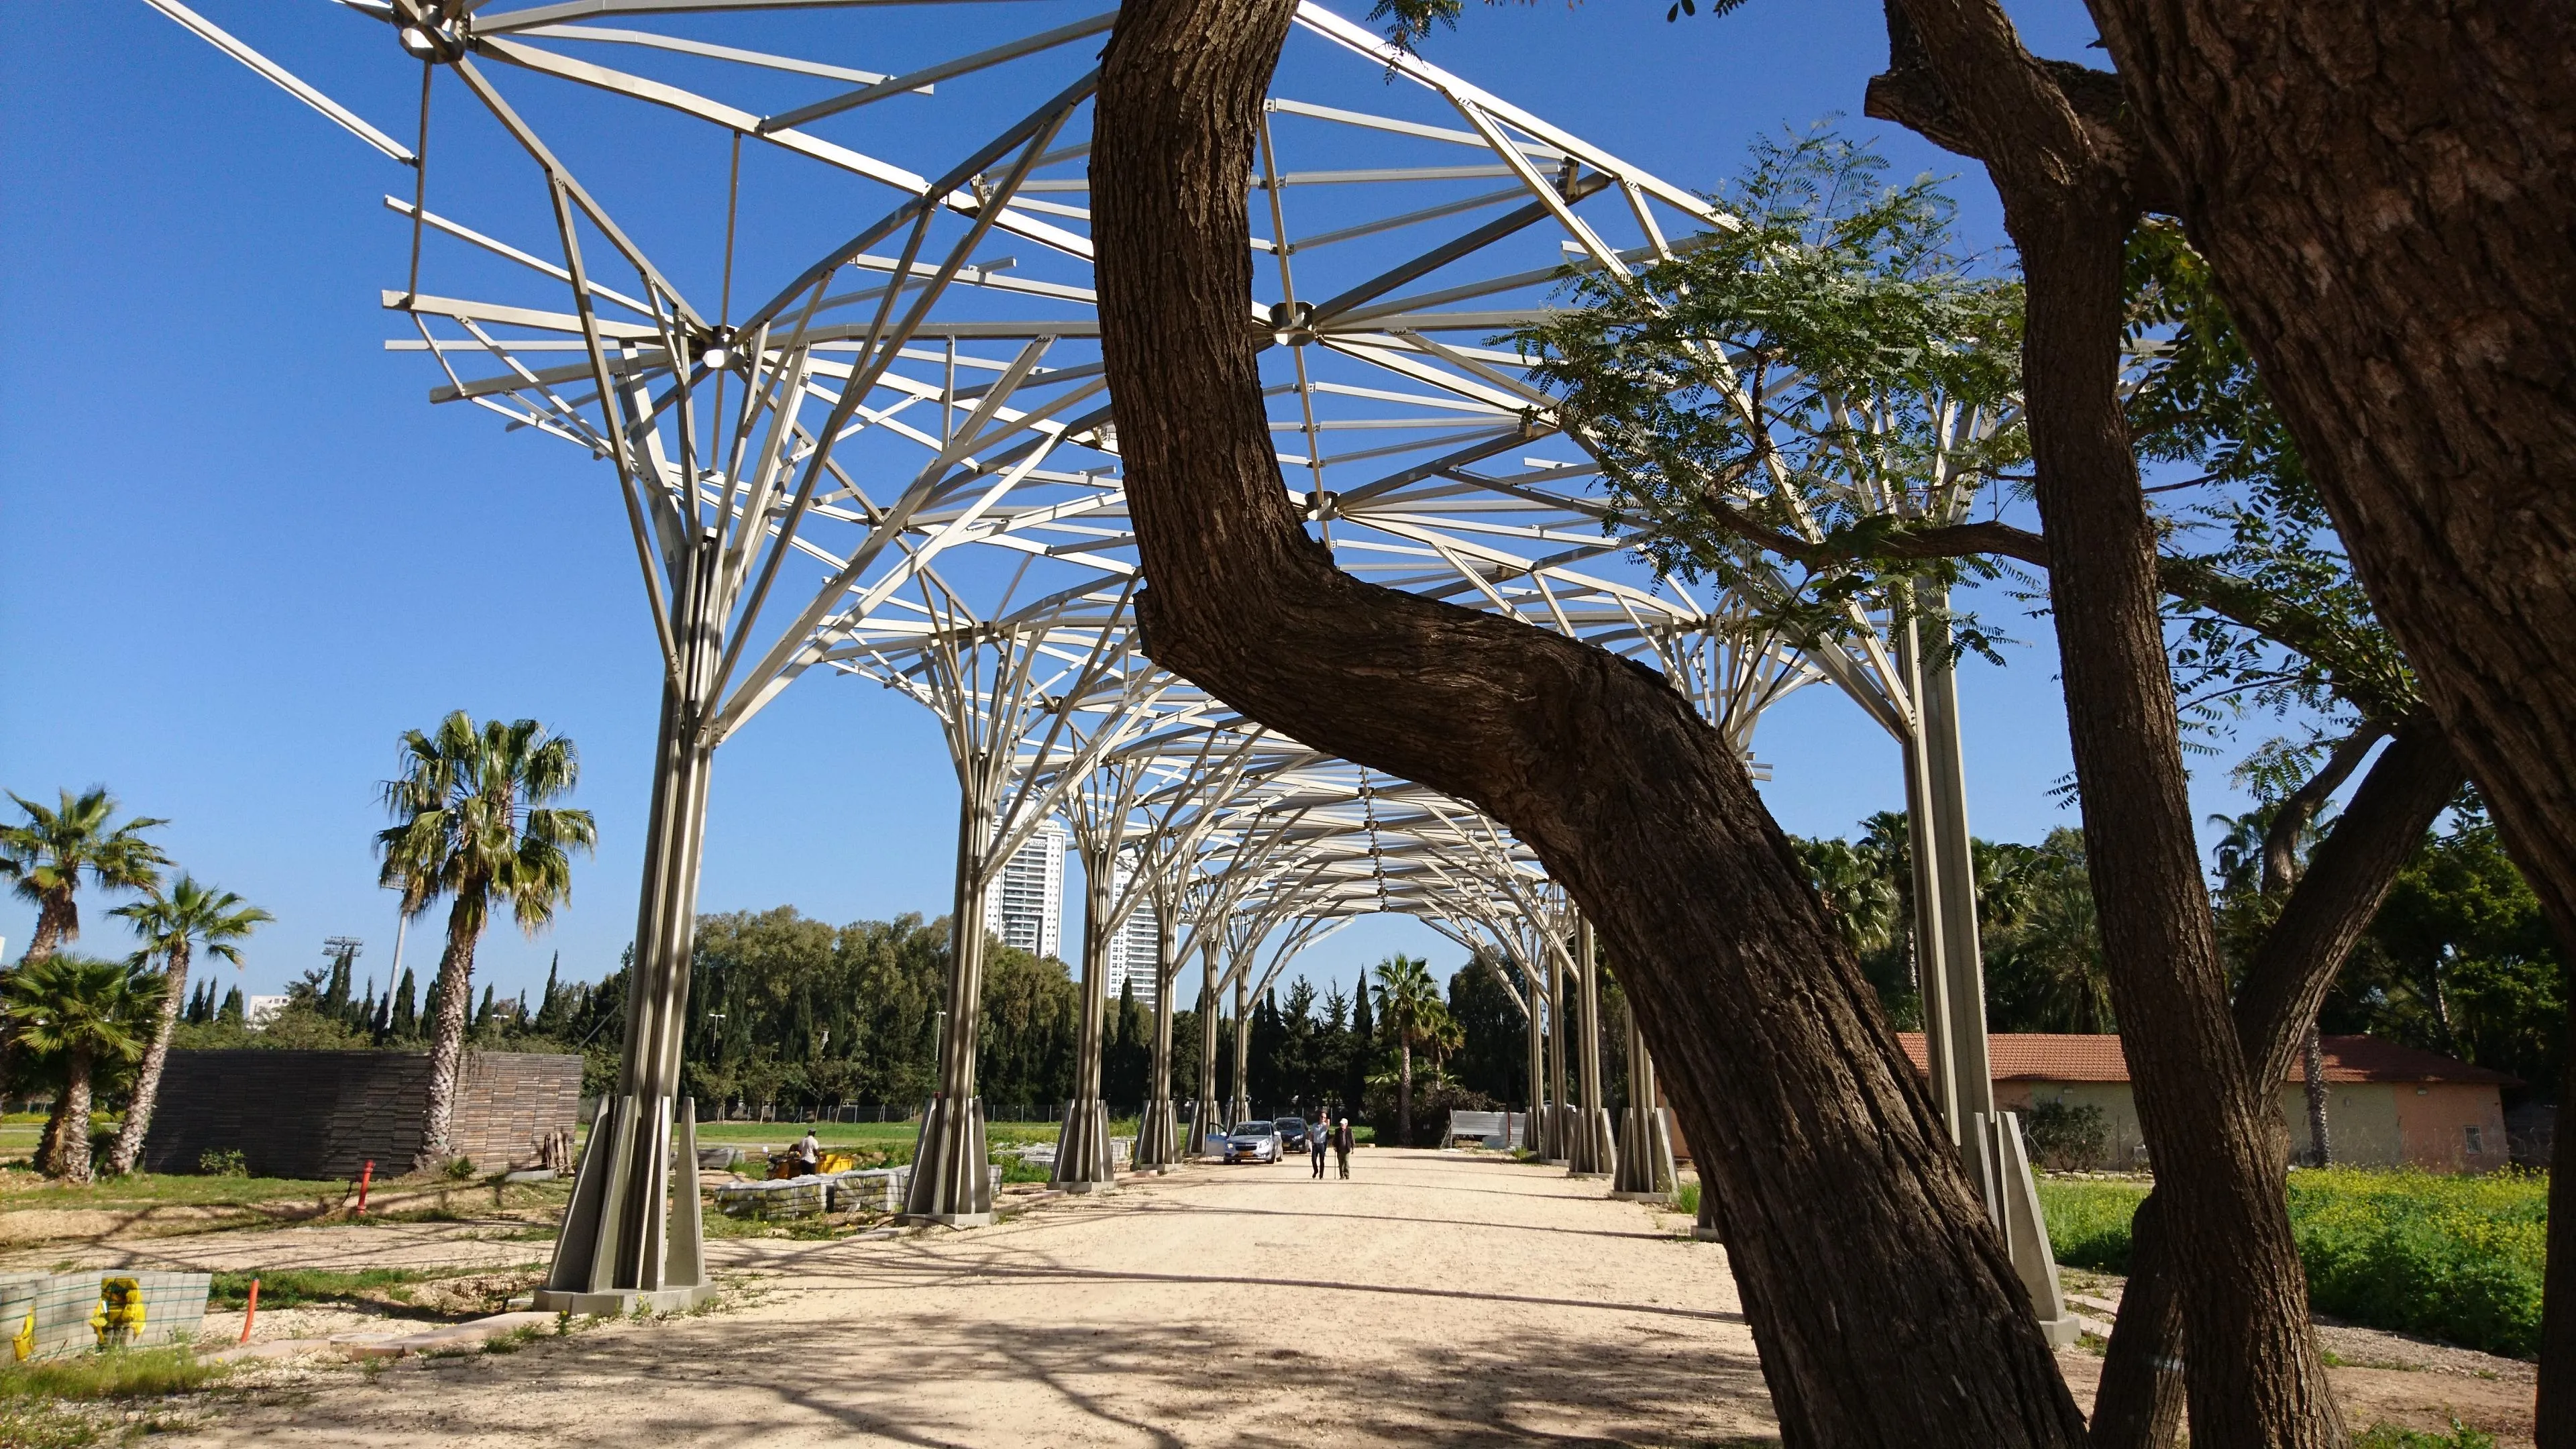 Ariel Sharon Park in Israel, Middle East | Parks - Rated 3.7